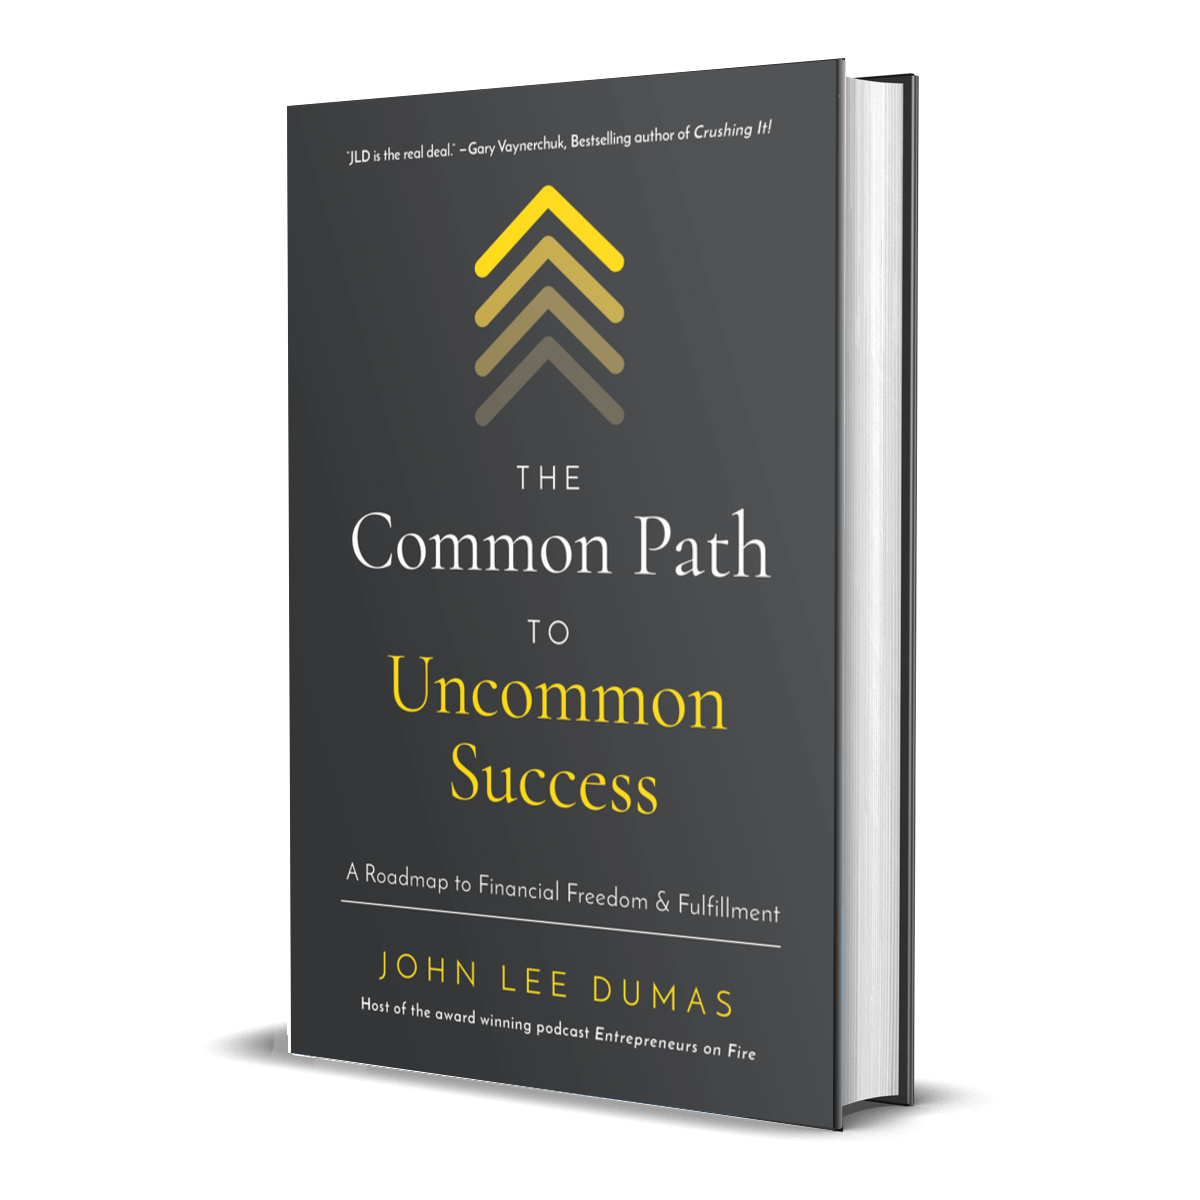 The Common Path to Uncommon Success by John Lee Dumas